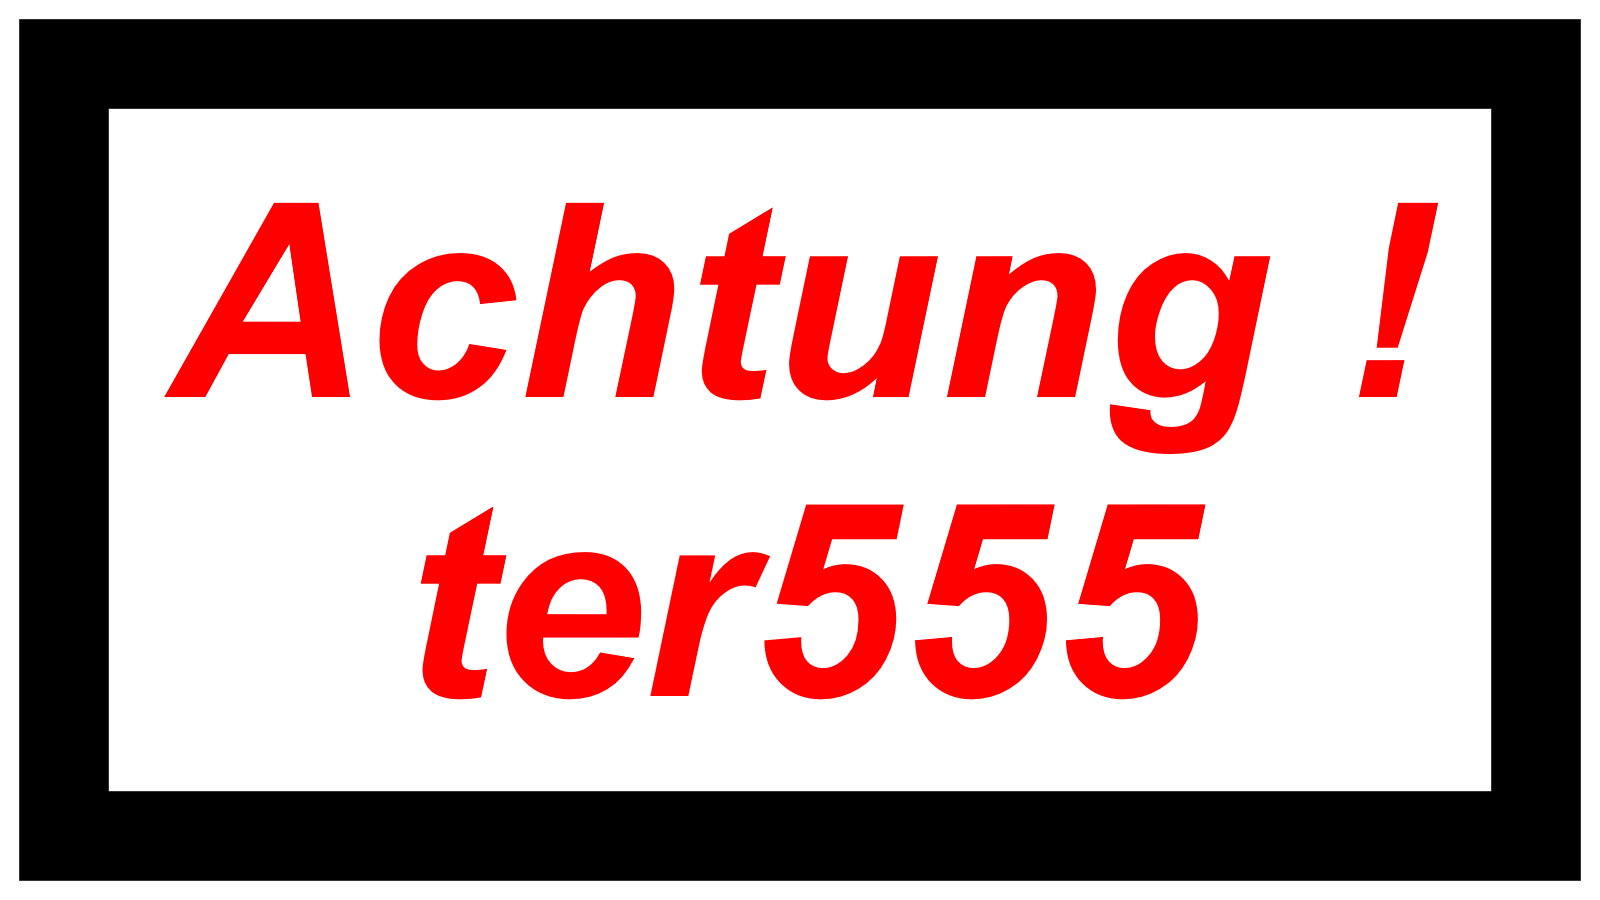 Achtung ! ter555